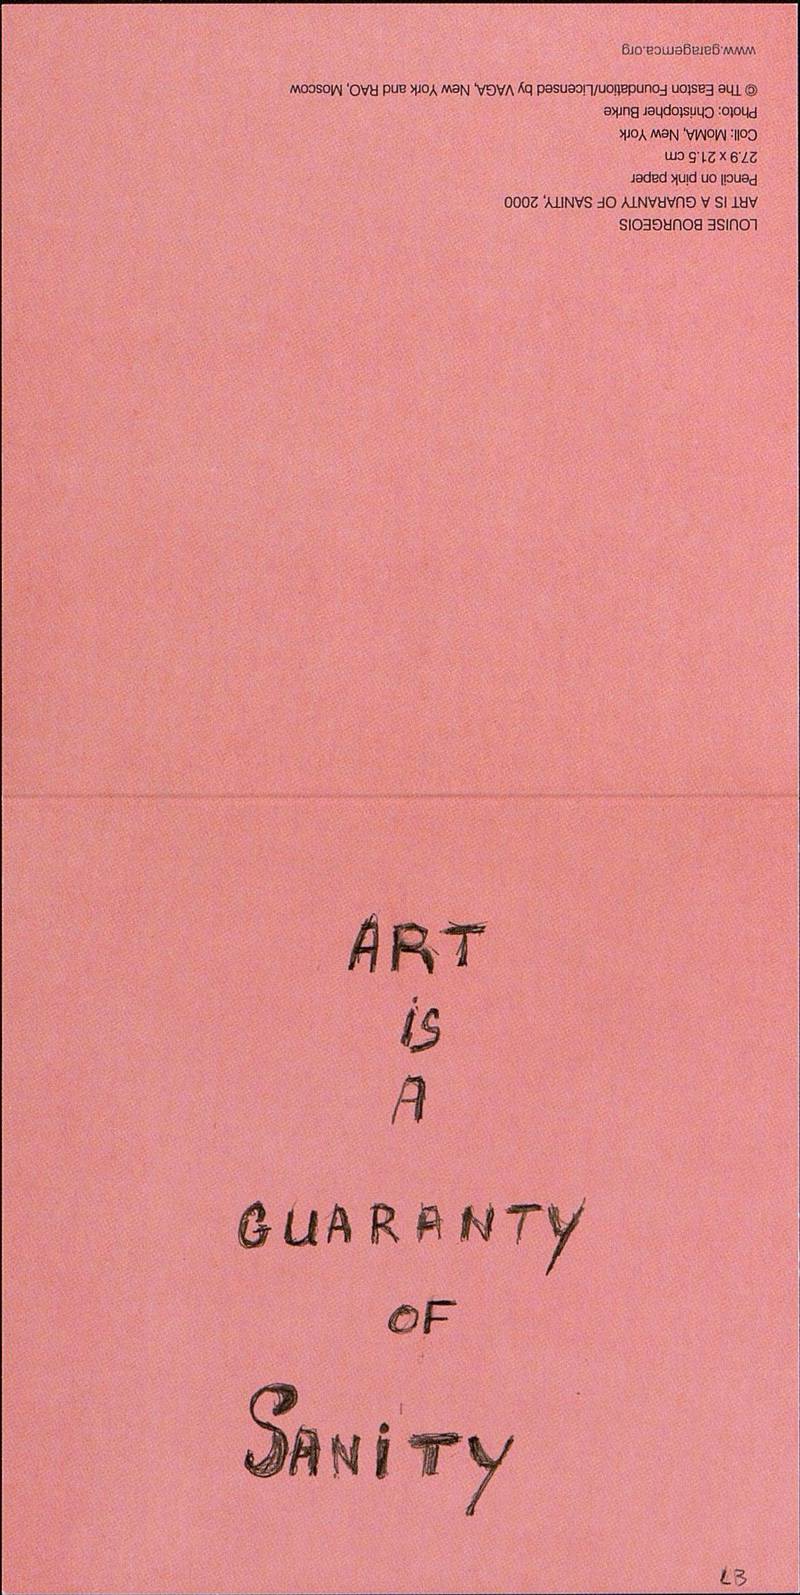 Louise Bourgeois. Art is guaranty of sanity